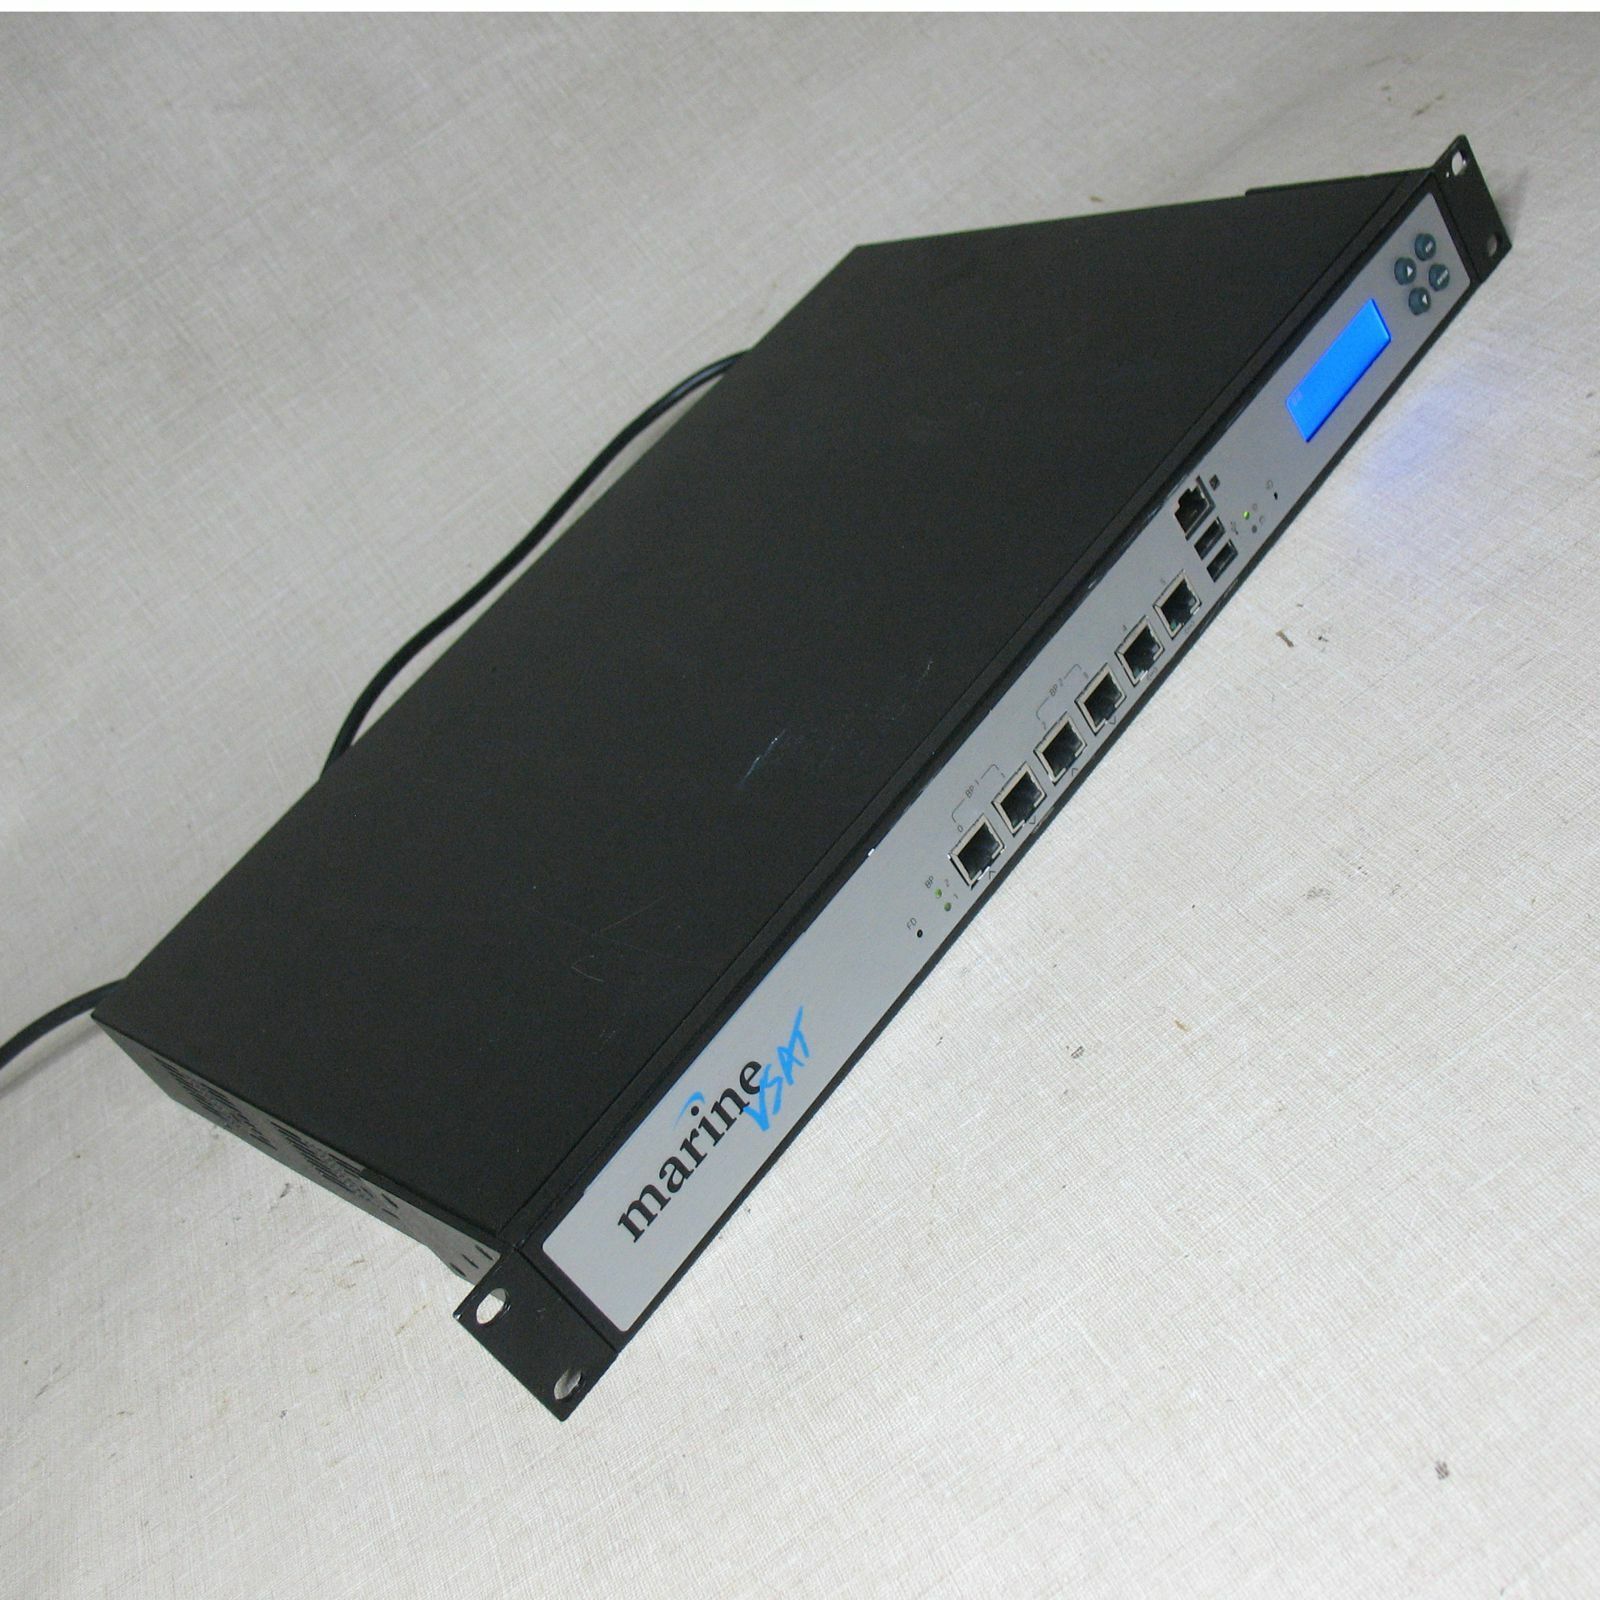 MARINE VSAT GATEWAY ALL IN ONE IT DEVICE ION 1000 SERIES MISSING PASSWORD 